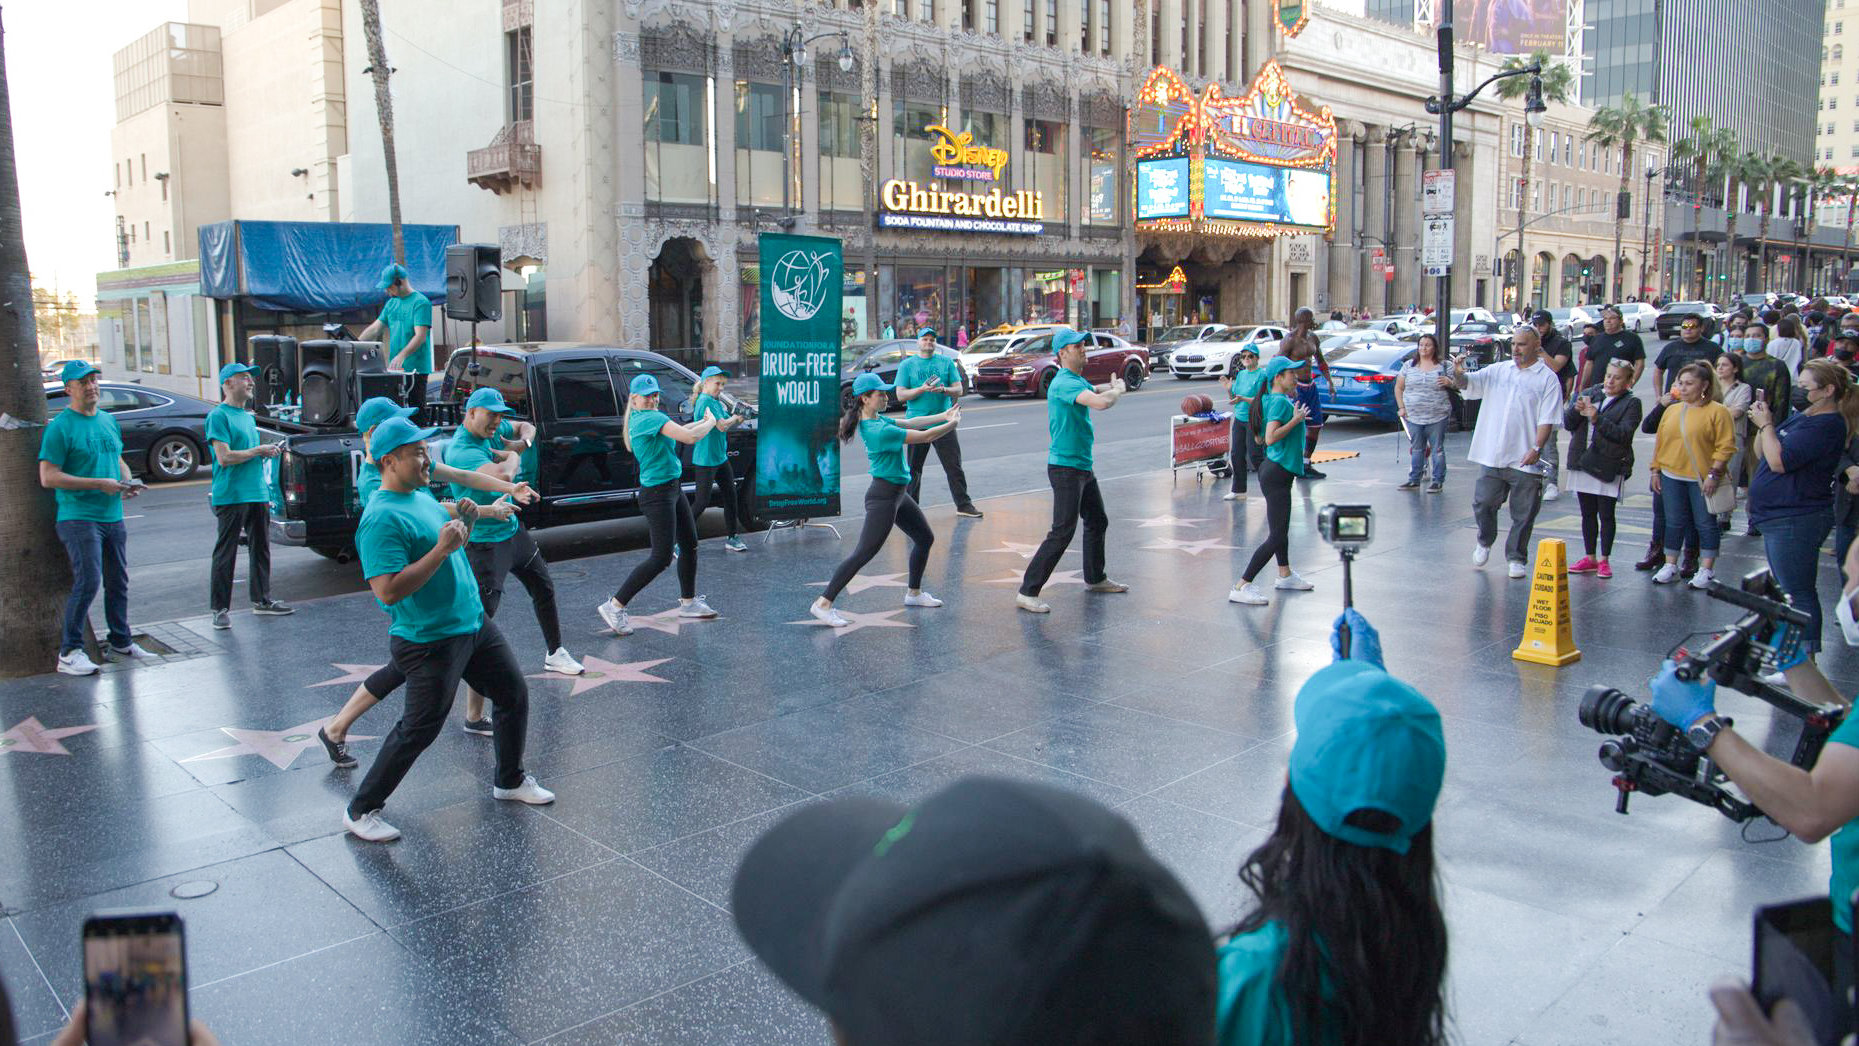 Volunteers from the Foundation for a Drug-Free World surprise crowds on Hollywood’s celebrated Walk of Fame with a flash mob to promote drug-free living.